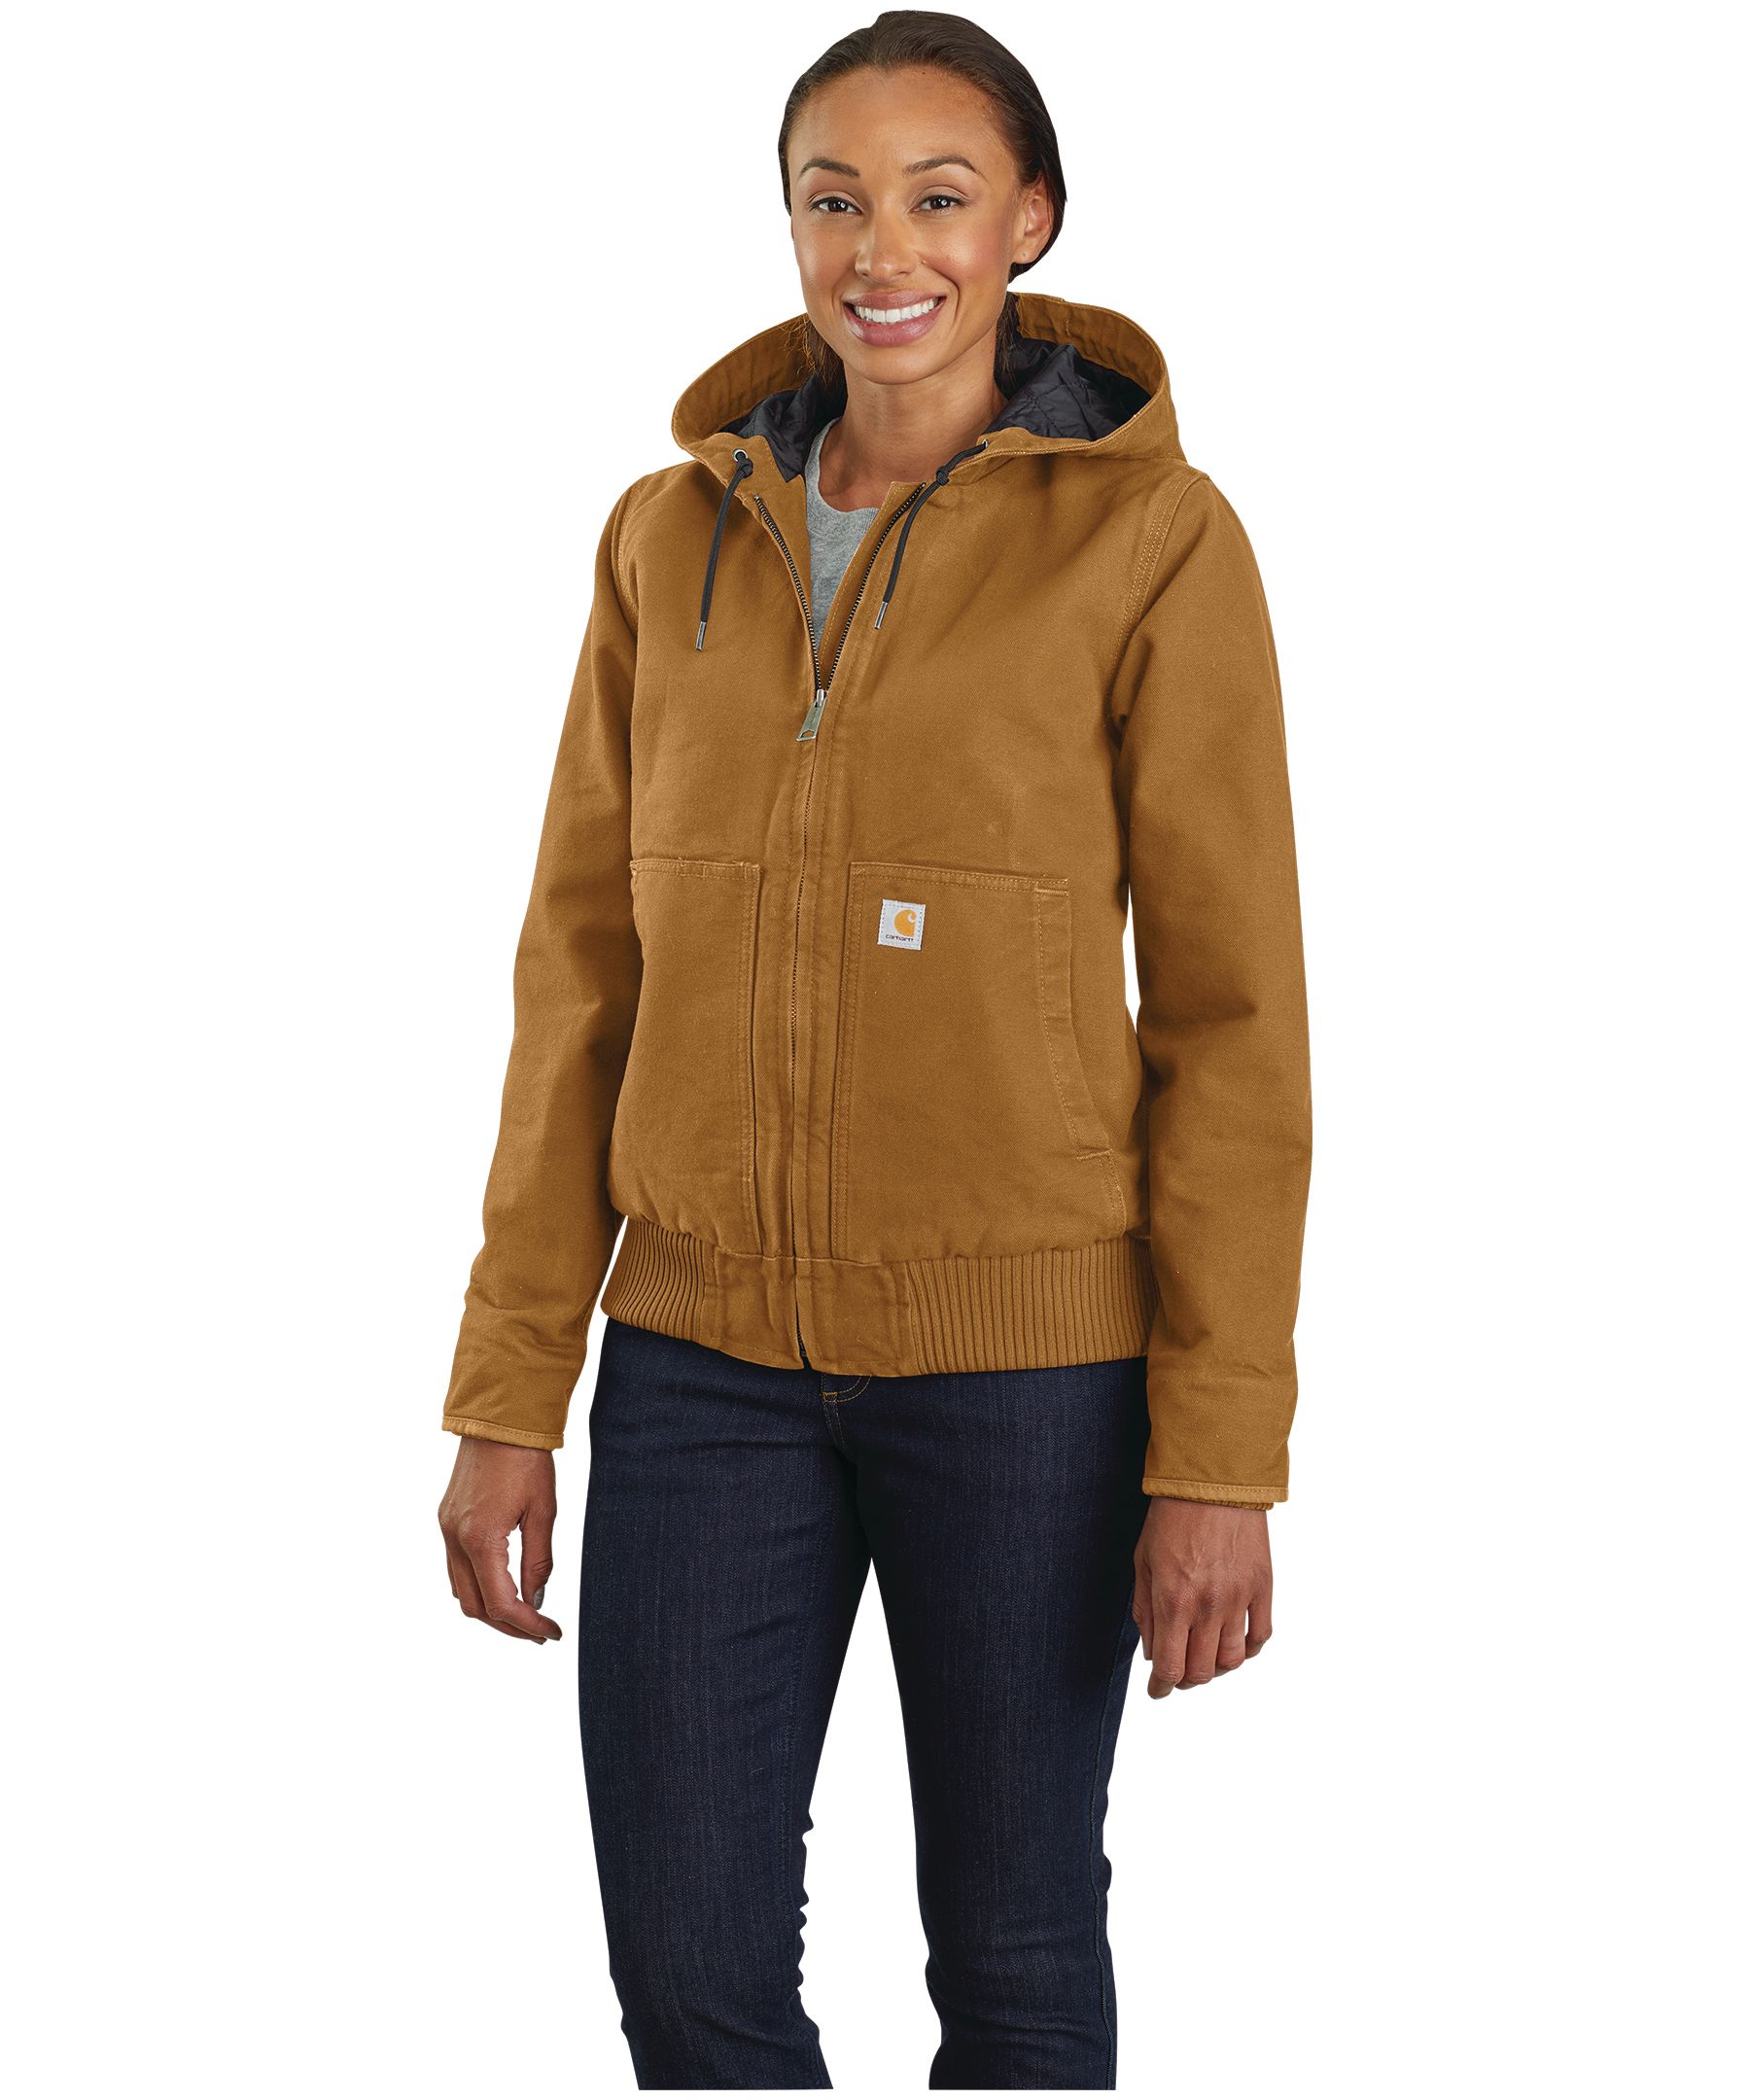 Carhartt Women's Washed Duck Loose Fit Insulated Active Jacket